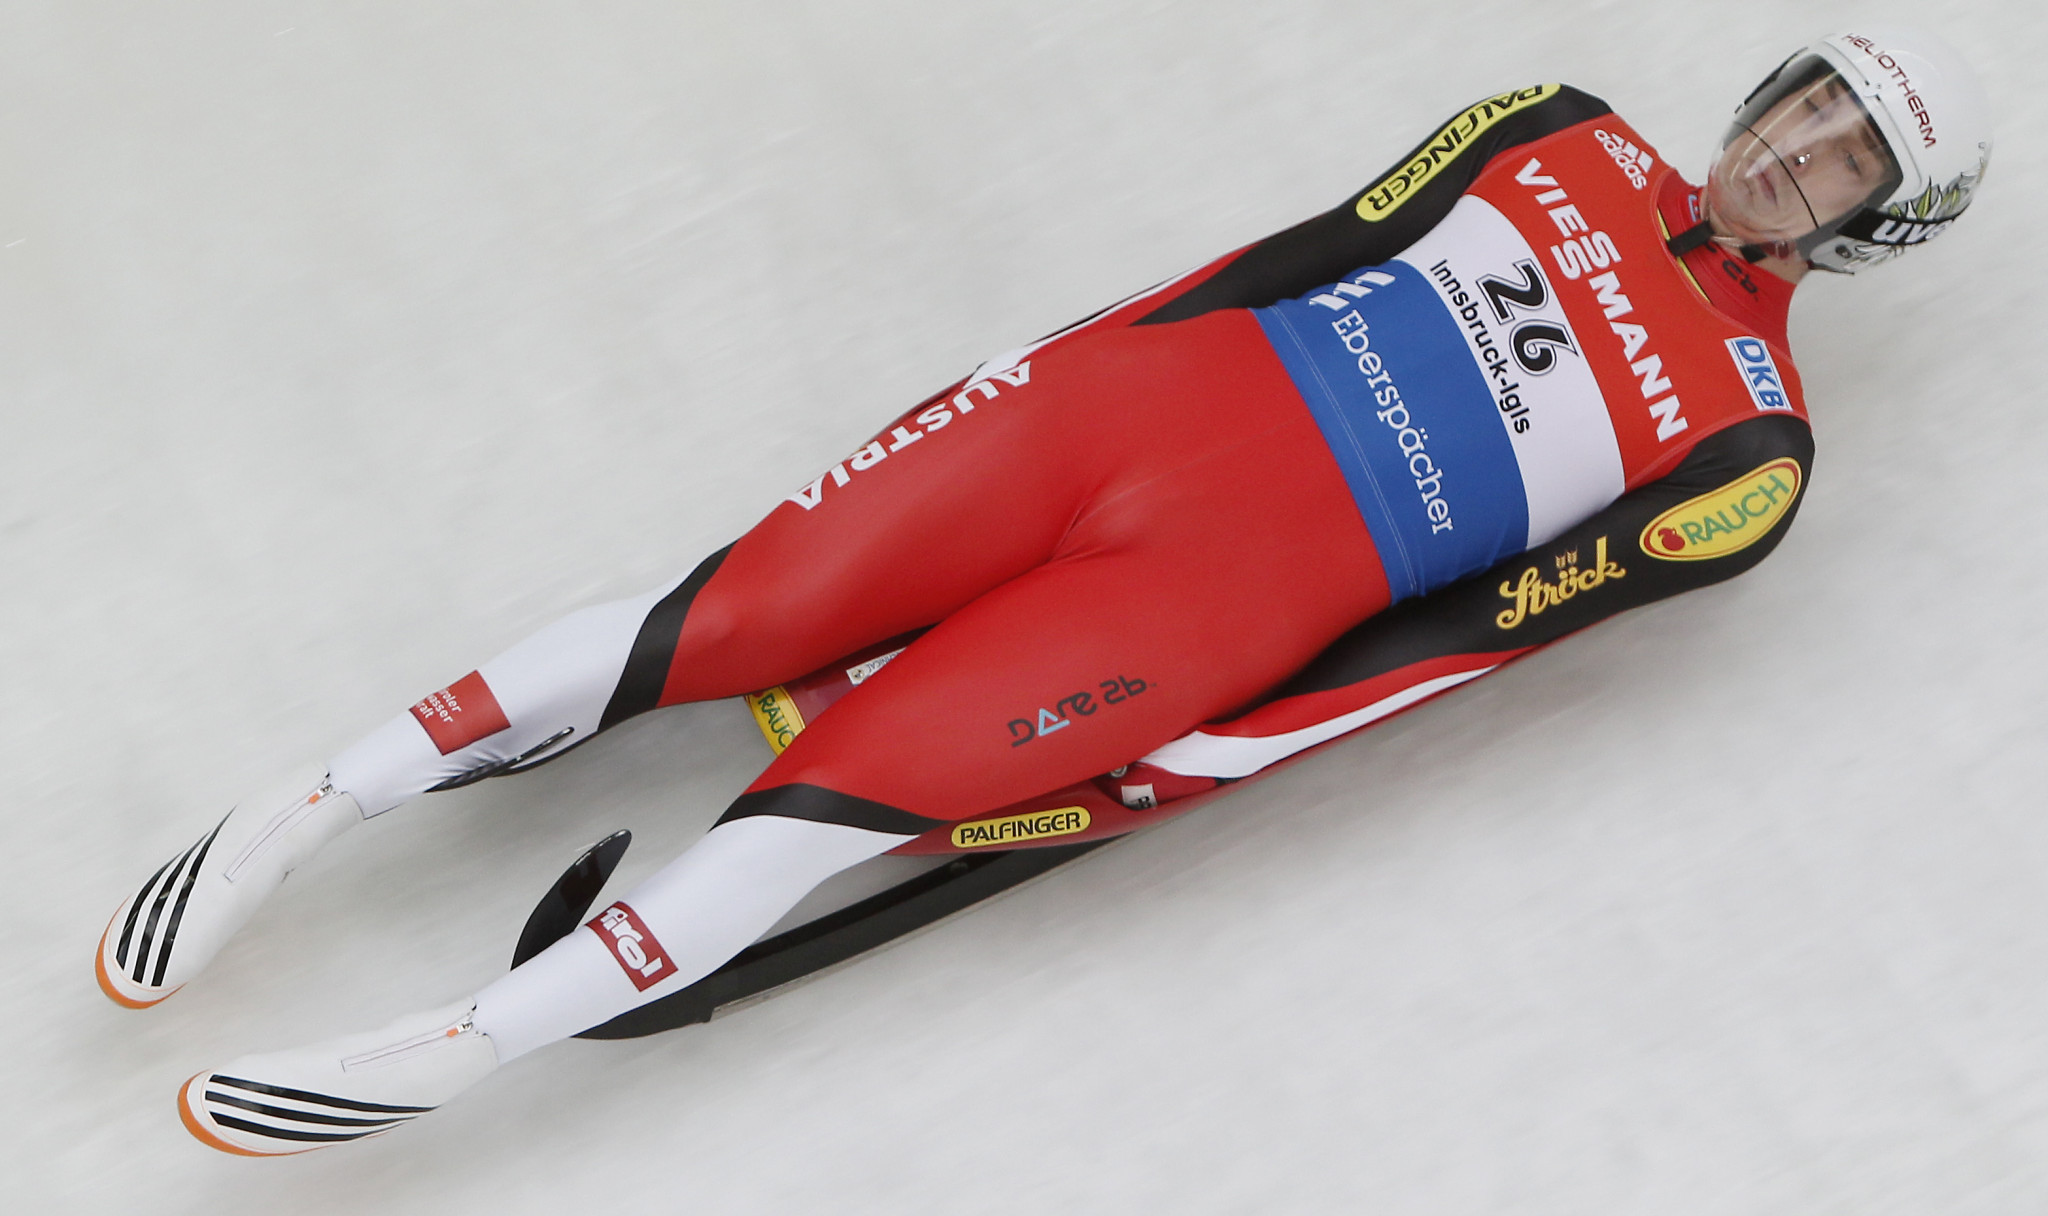 Egger earns maiden Luge World Cup win in Königssee after competition abandoned during second run